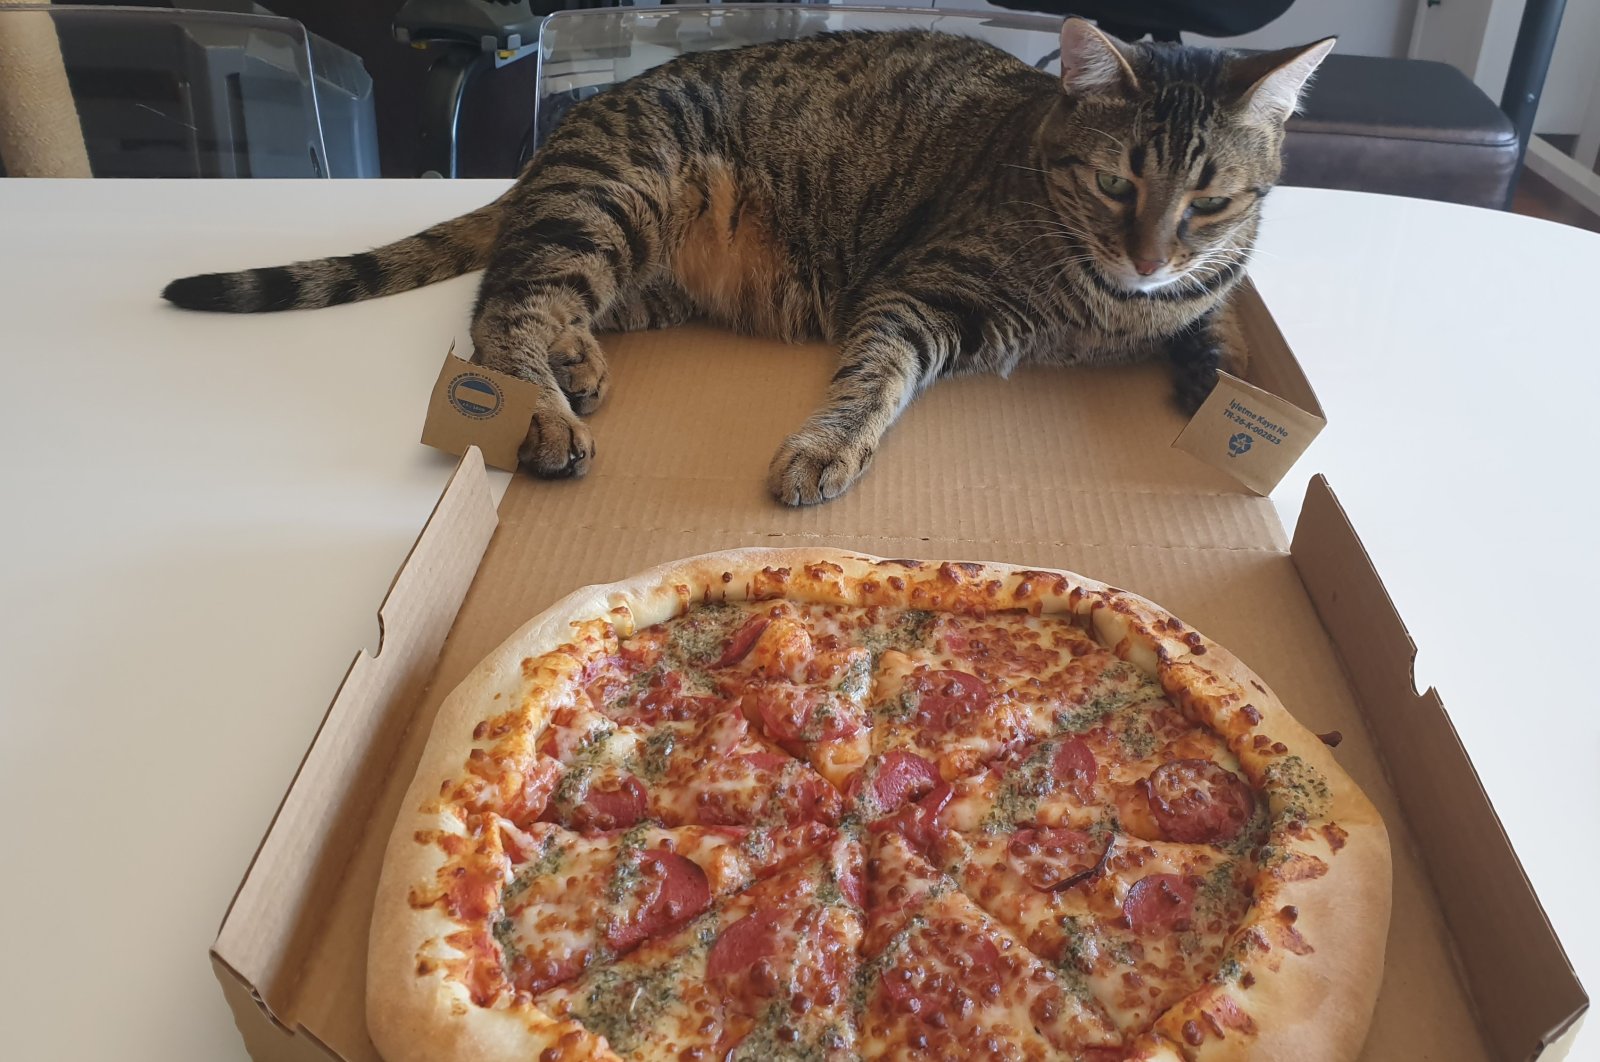 Environmentalist cat unimpressed with fast-food pizza covered in factory-farmed meat. (Photo courtesy of Daily Sabah’s Carl Holtman)